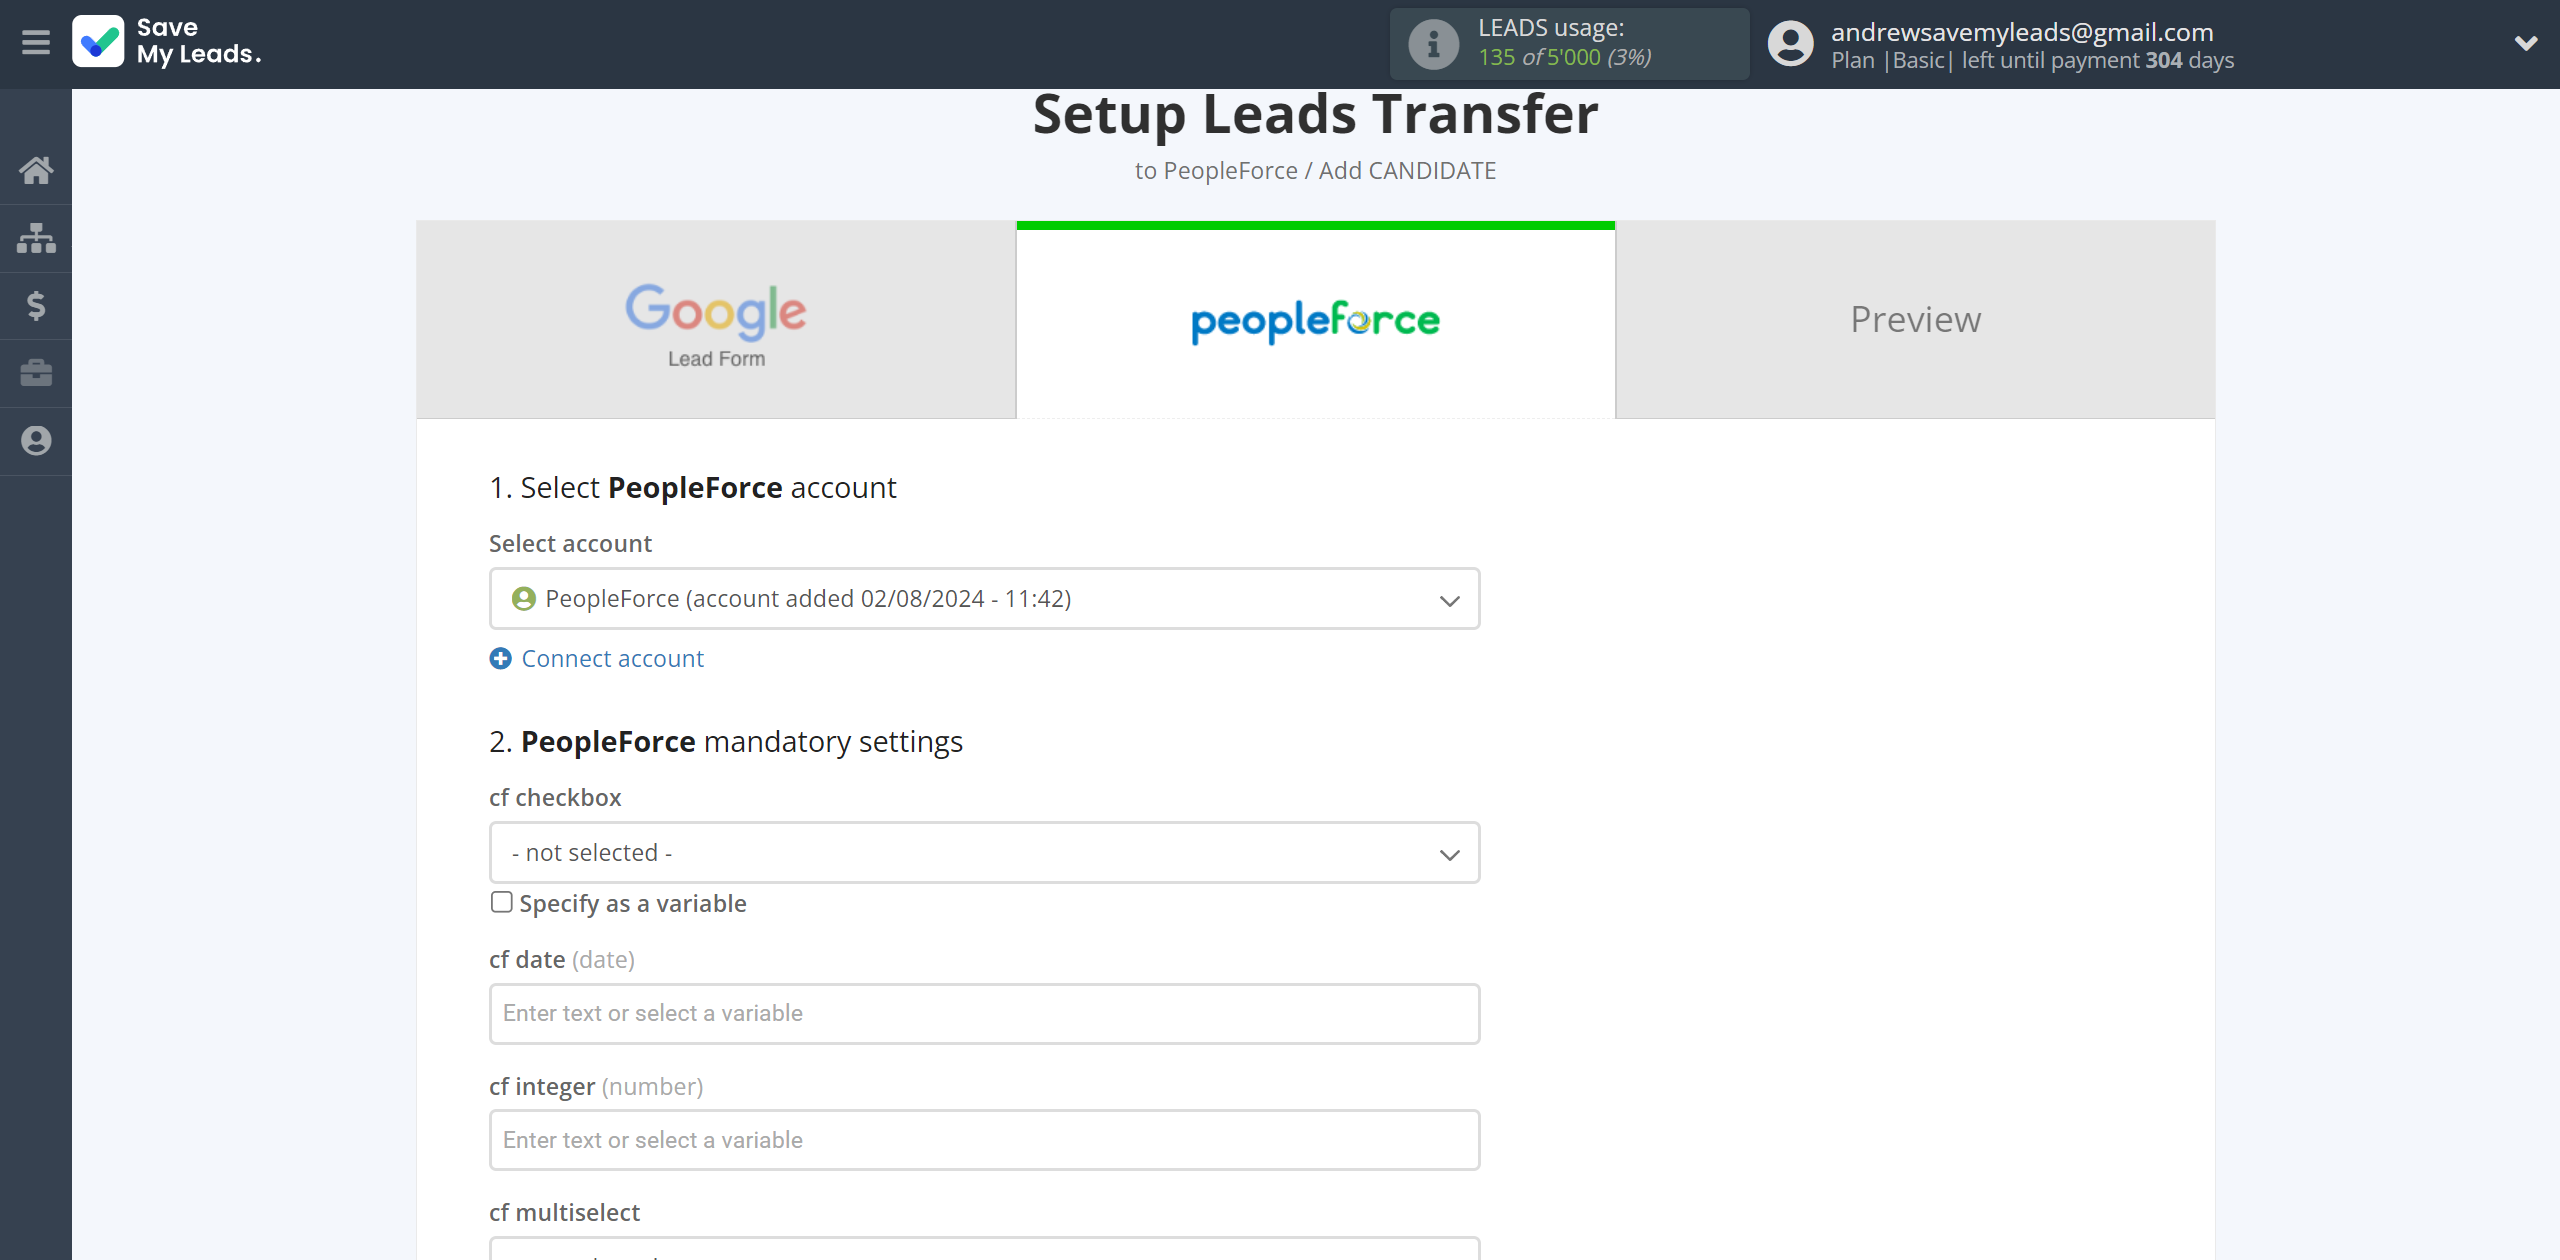 How to Connect Google Lead Form with PeopleForce Add Candidate | Assigning fields